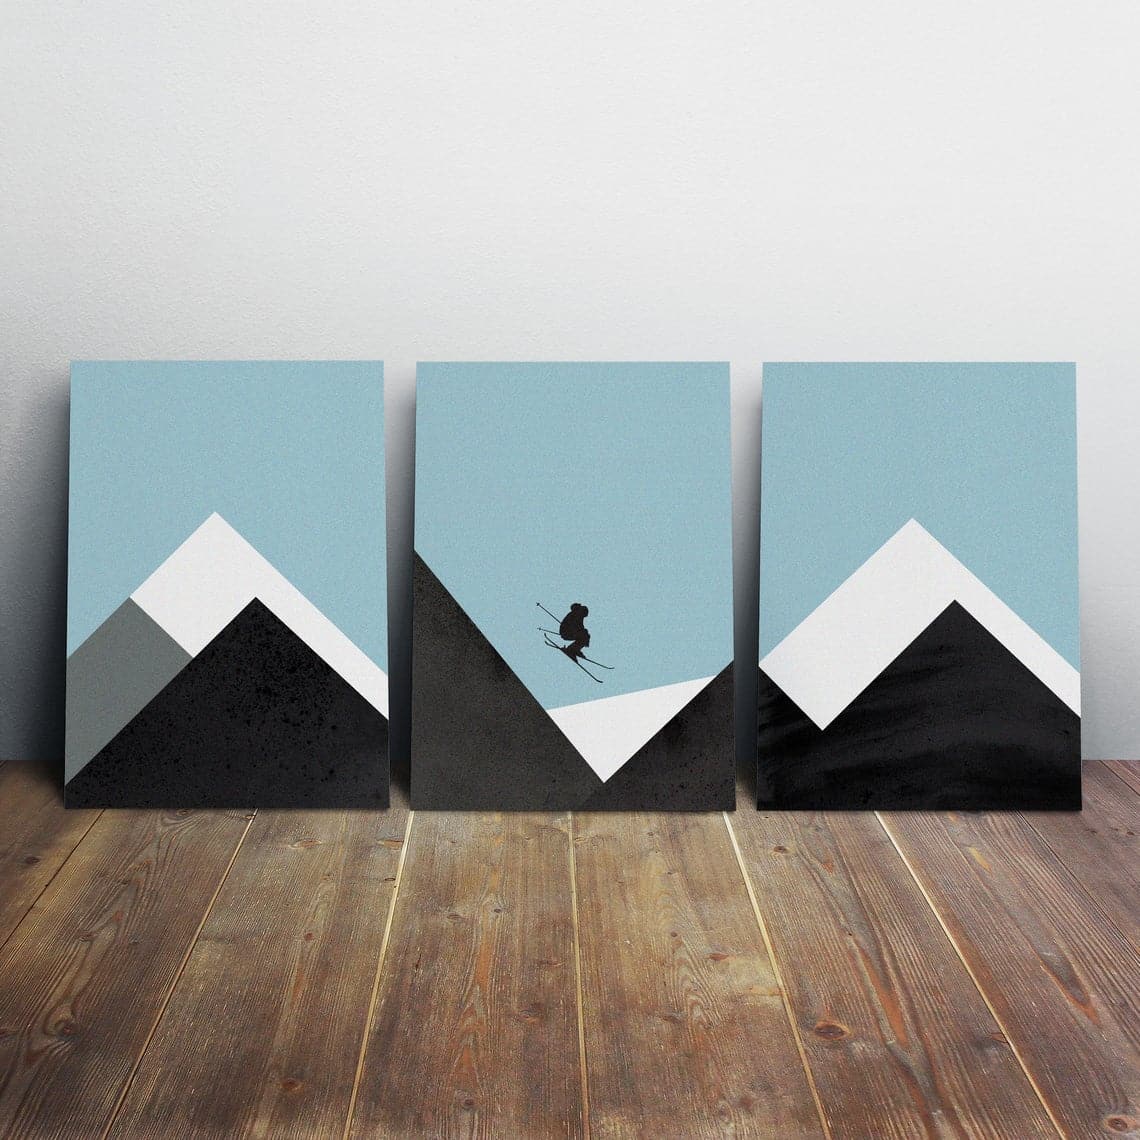 Contemporary Wall Art Display for an Avid Skiing Fan